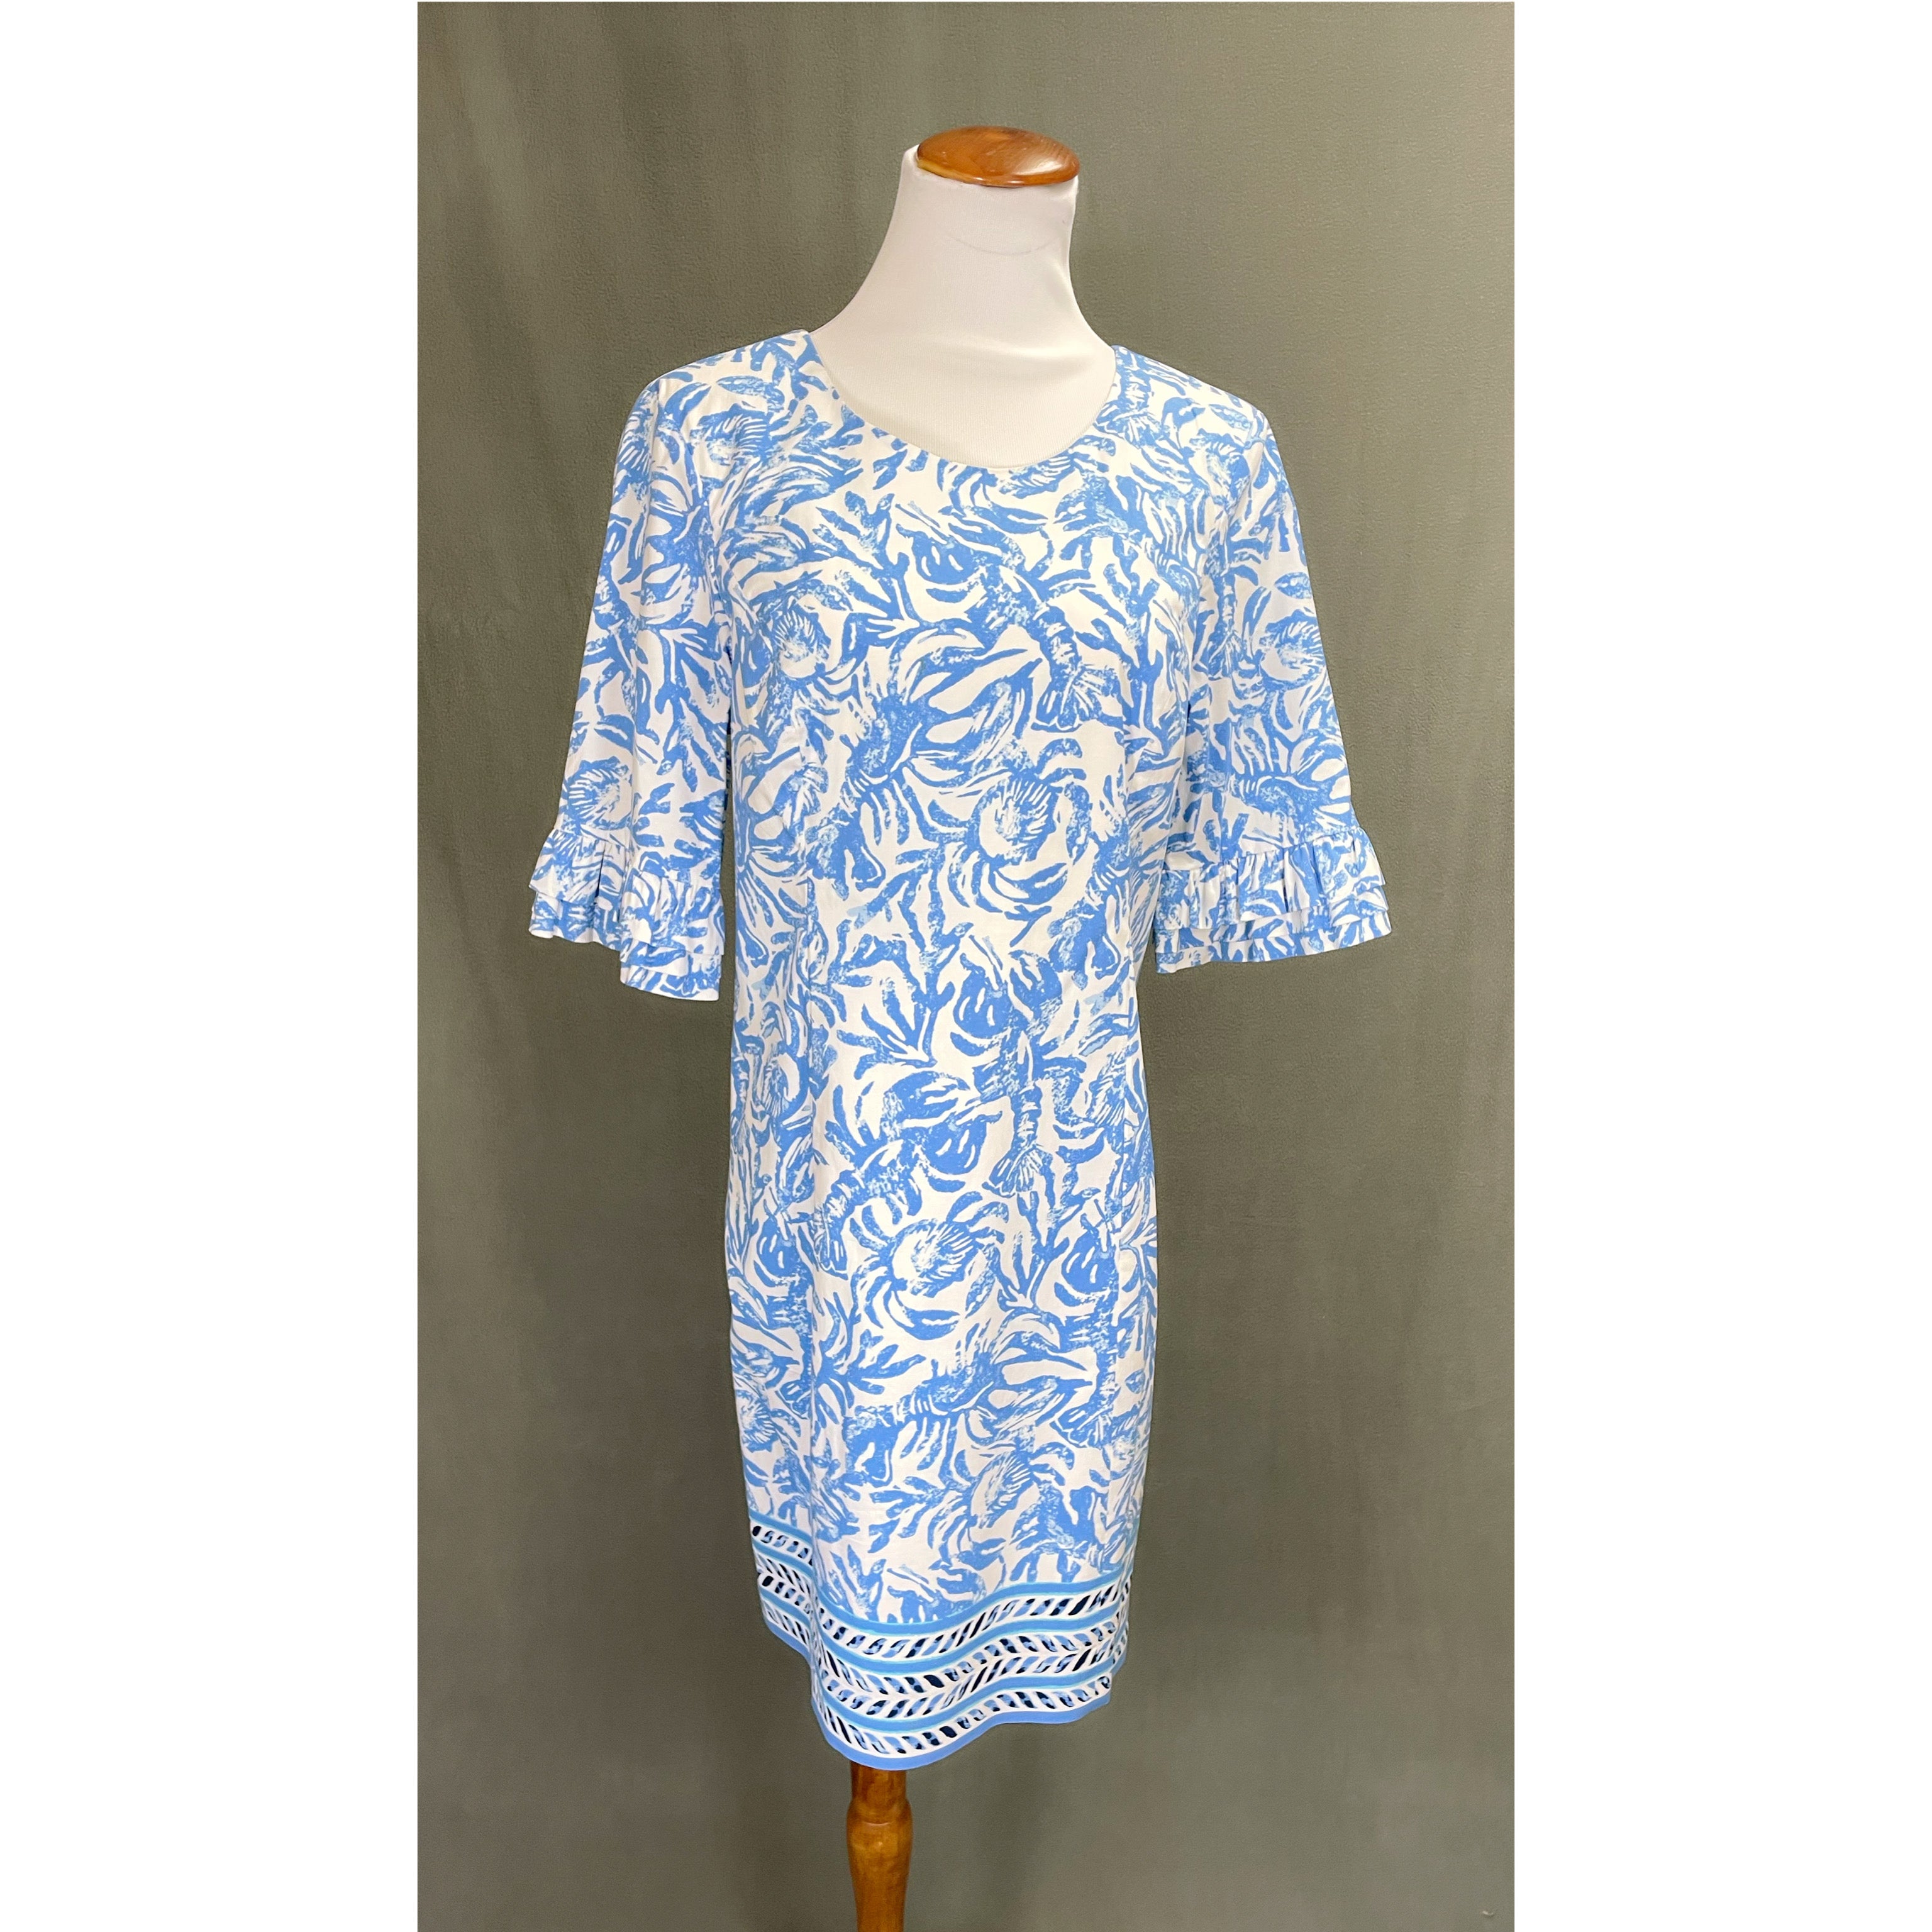 Lilly Pulitzer blue and white dress, size 6